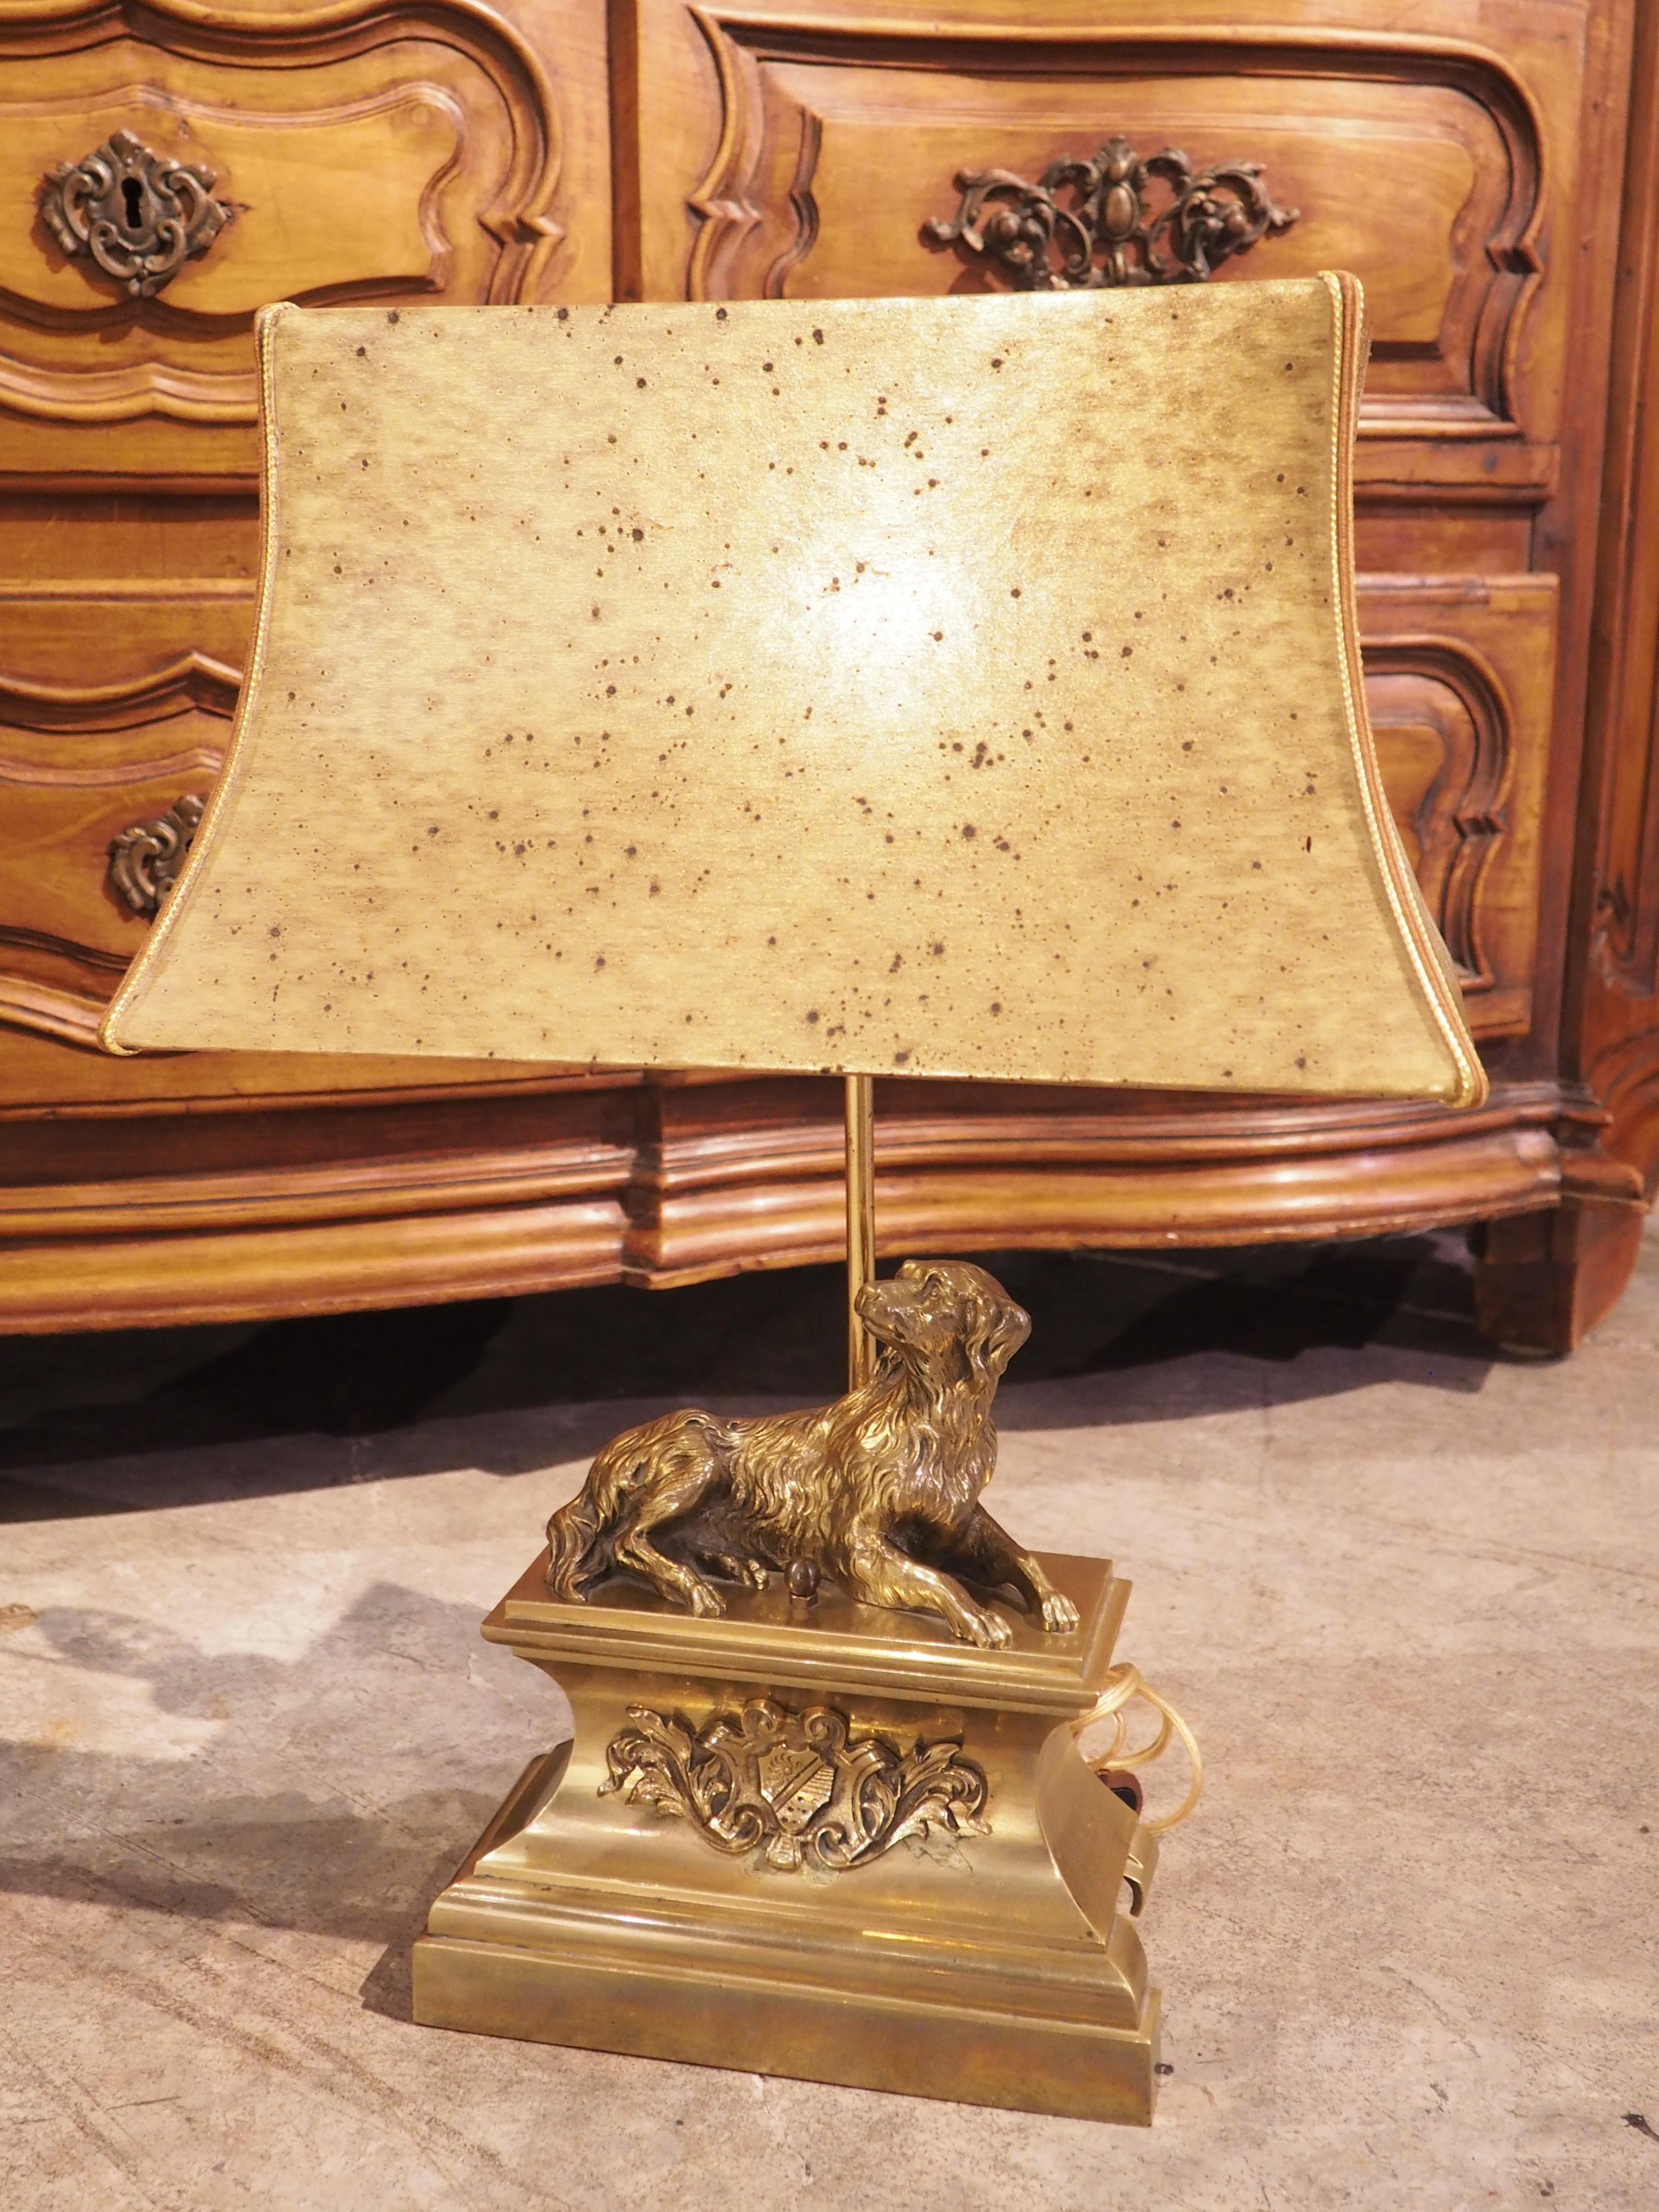 Originally part of a 19th century bar de cheminee, these gilt bronze dogs have been repurposed into a pair of table lamps. Sometimes referred to as a “hearth fender”, a bar de cheminee was a decorative element placed in front of a fireplace that